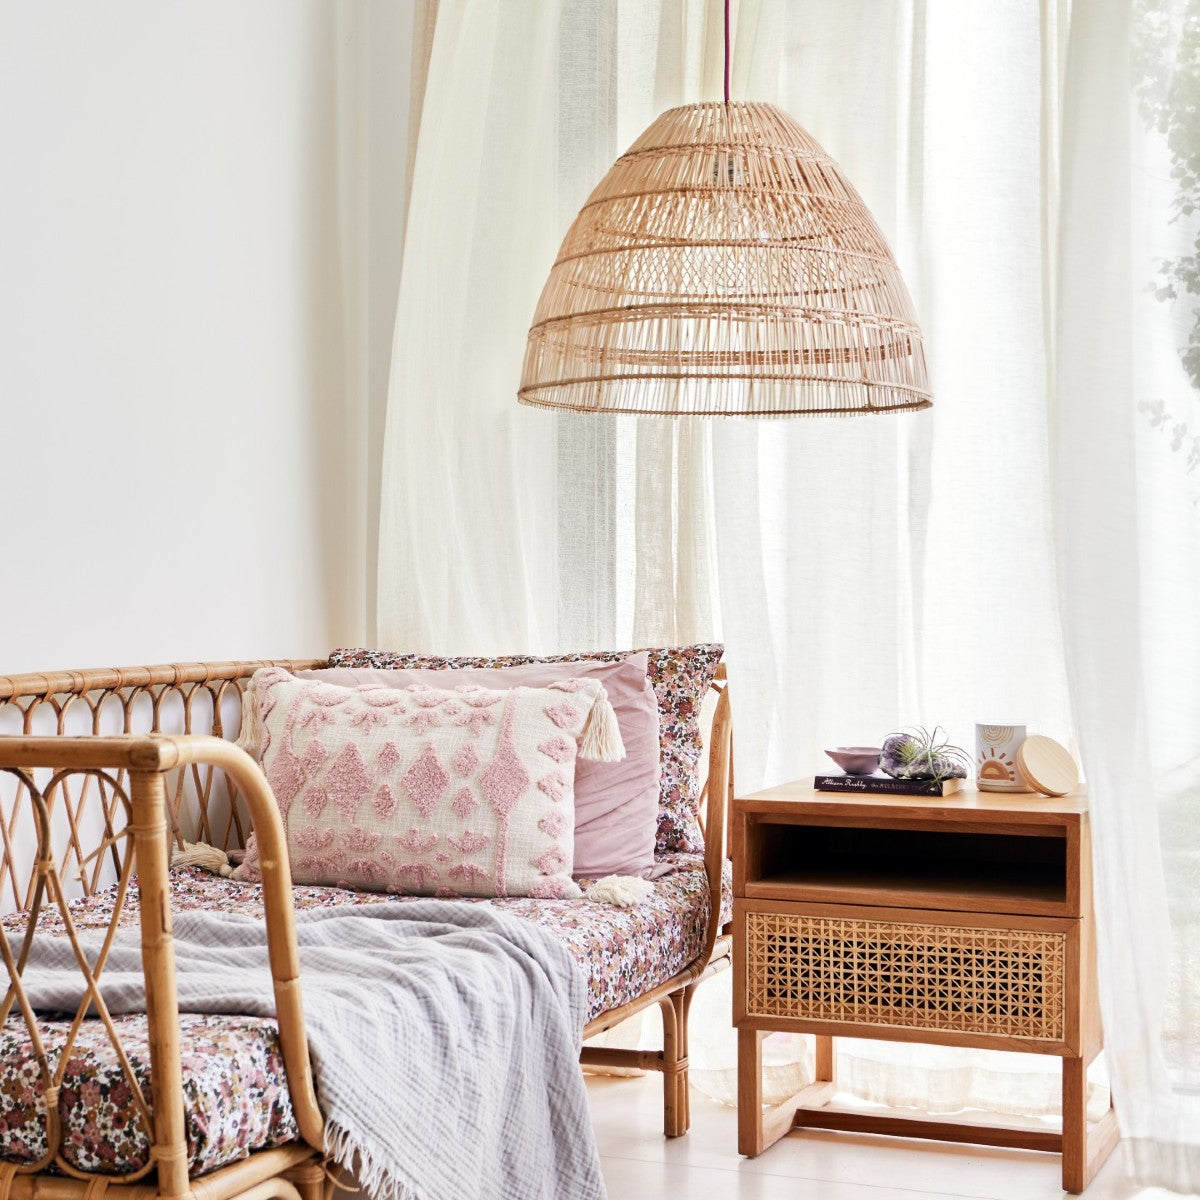 Coastal pendant light.Beautiful-lifestyle-photo-of-natural-rattan-pendant-light-shade-in-a-child's-bedroom-featuring-cane-day-bed-and-soft-pink-floral-bed-linen